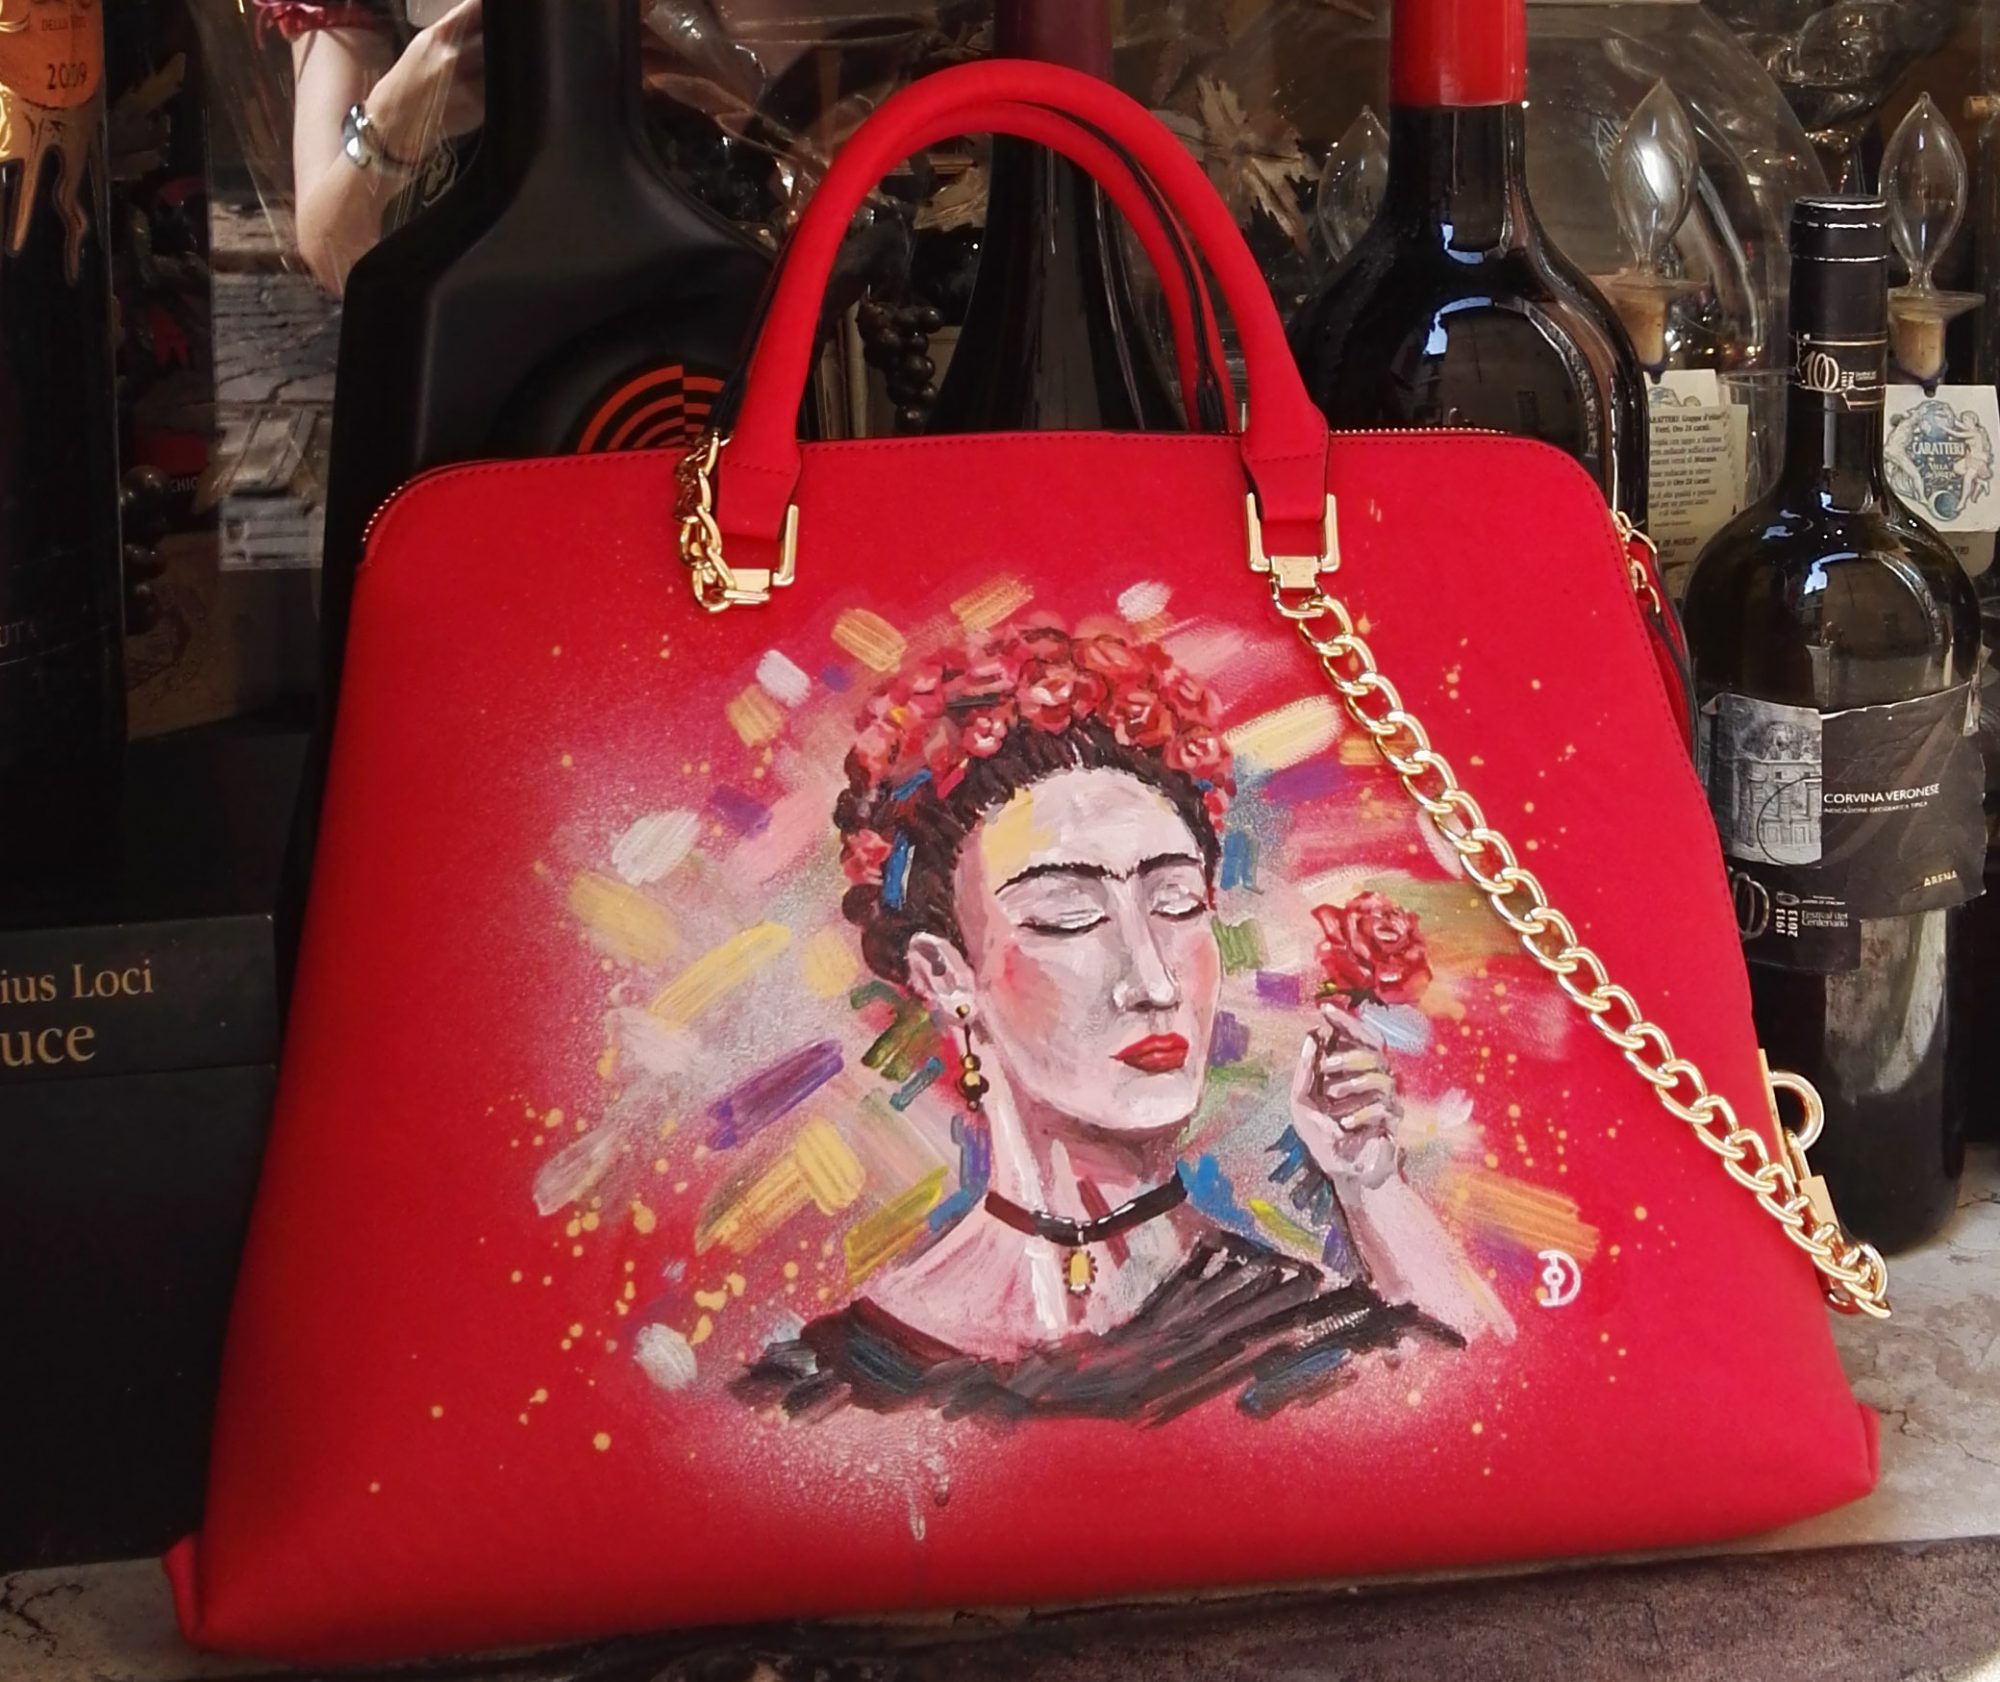 Hand-painted bags is what you really, really want. #leatherpainter #p